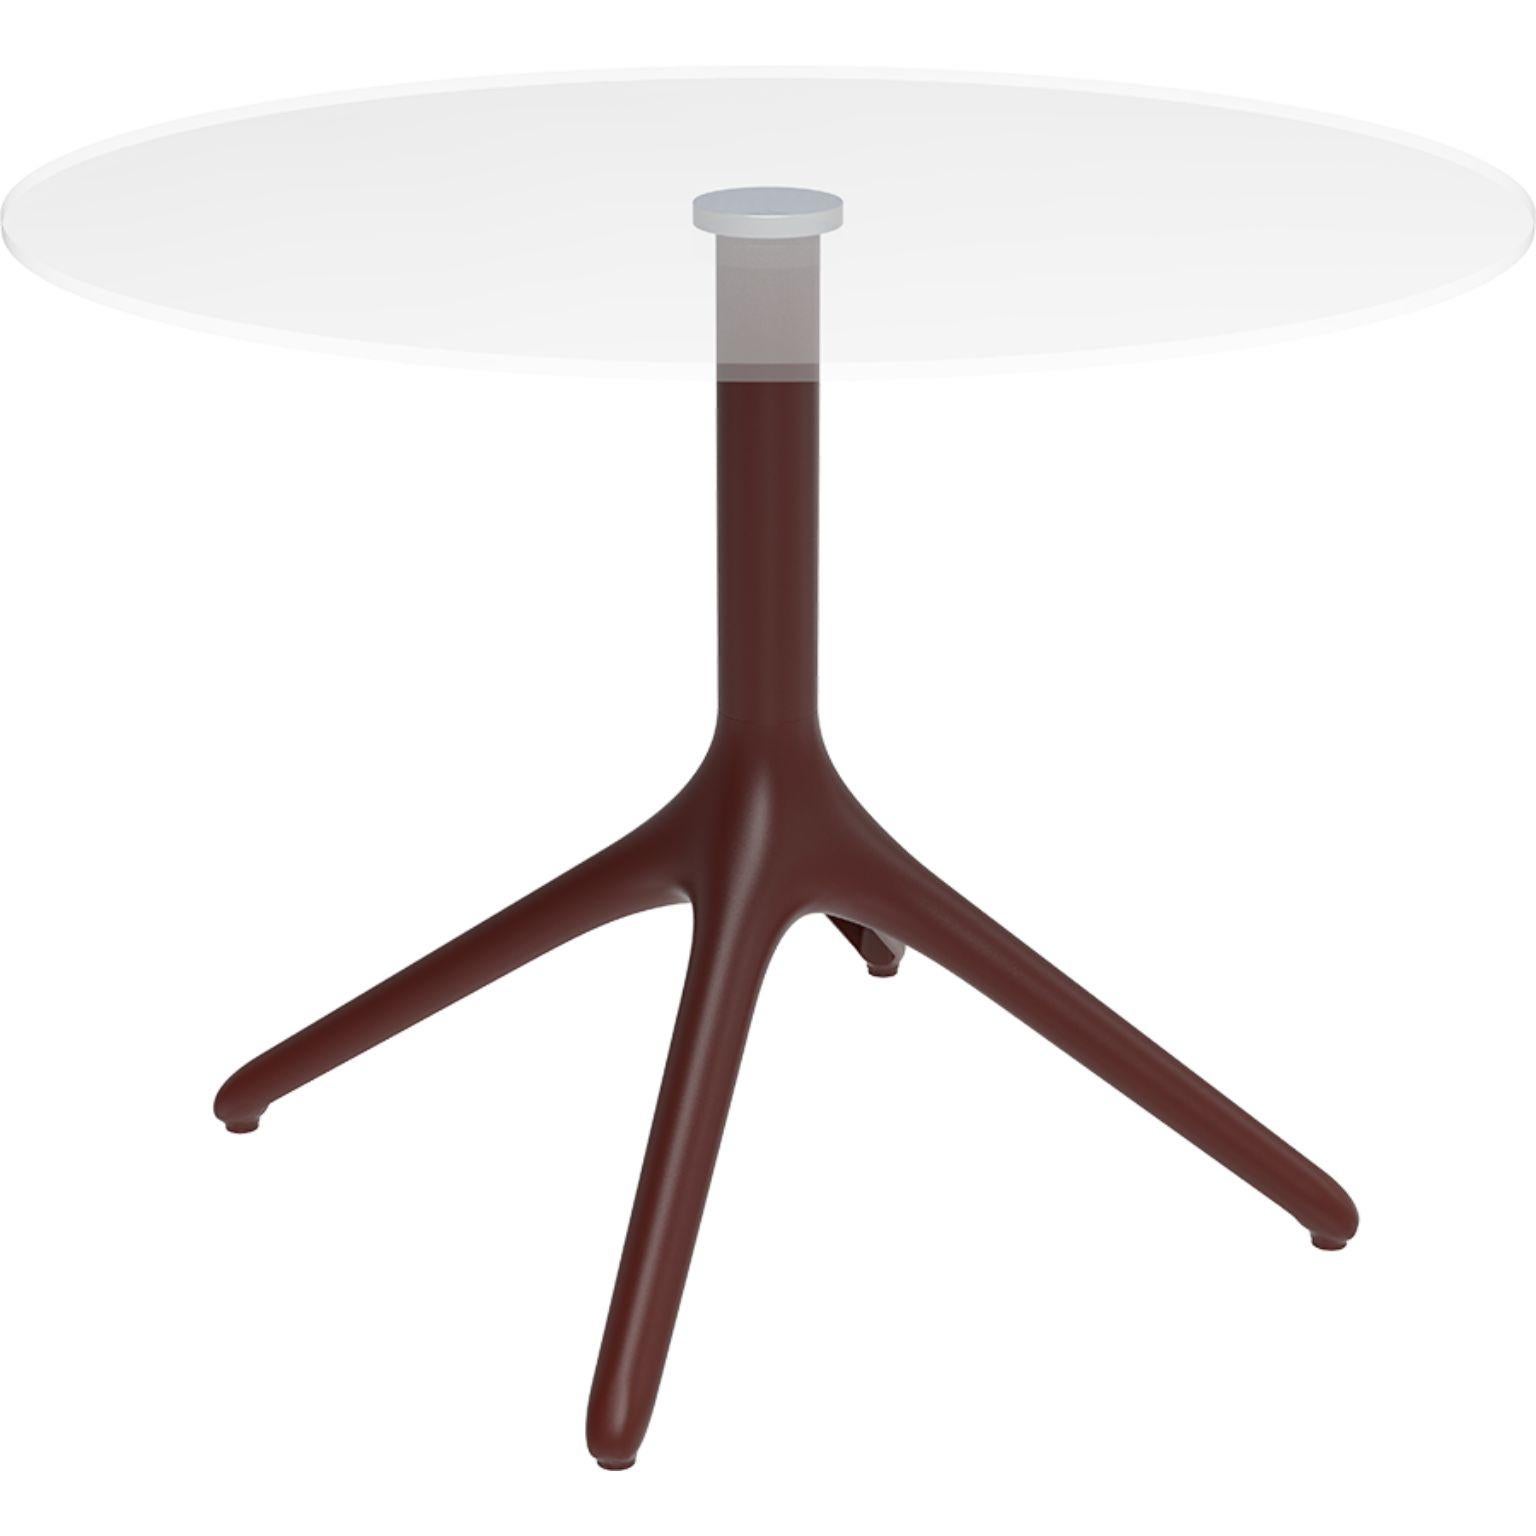 Uni Burgundy table XL 73 by MOWEE
Dimensions: D 50 x H 73 cm
Material: Aluminium, tempered glass
Weight: 9 kg
Also available in different colours and finishes.

A table designed to be as versatile as possible and can coexist with a variety of